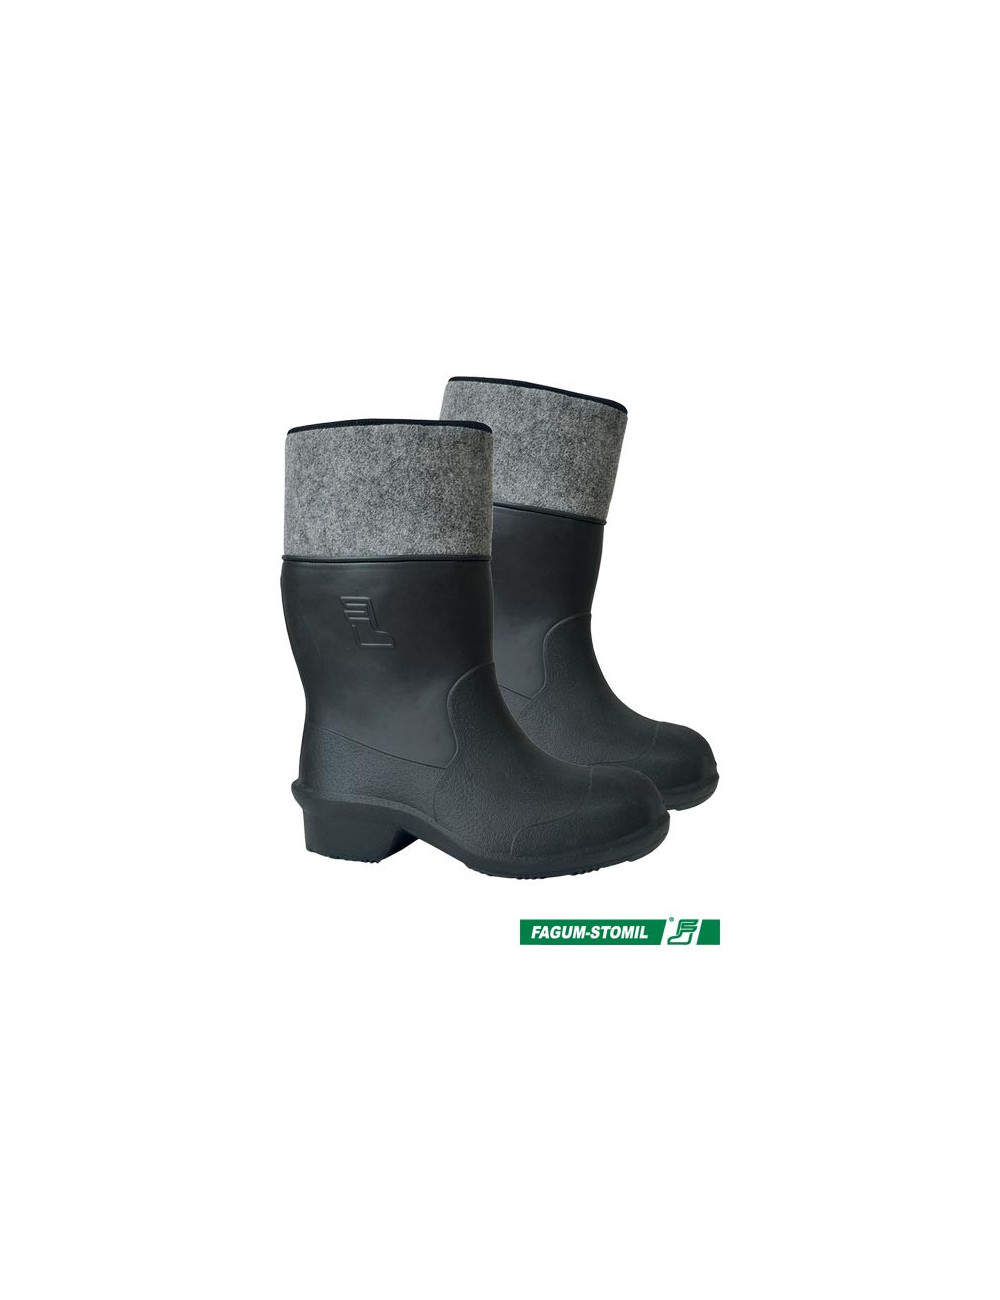 Occupational shoes bfgarden b black Fagum-stomil